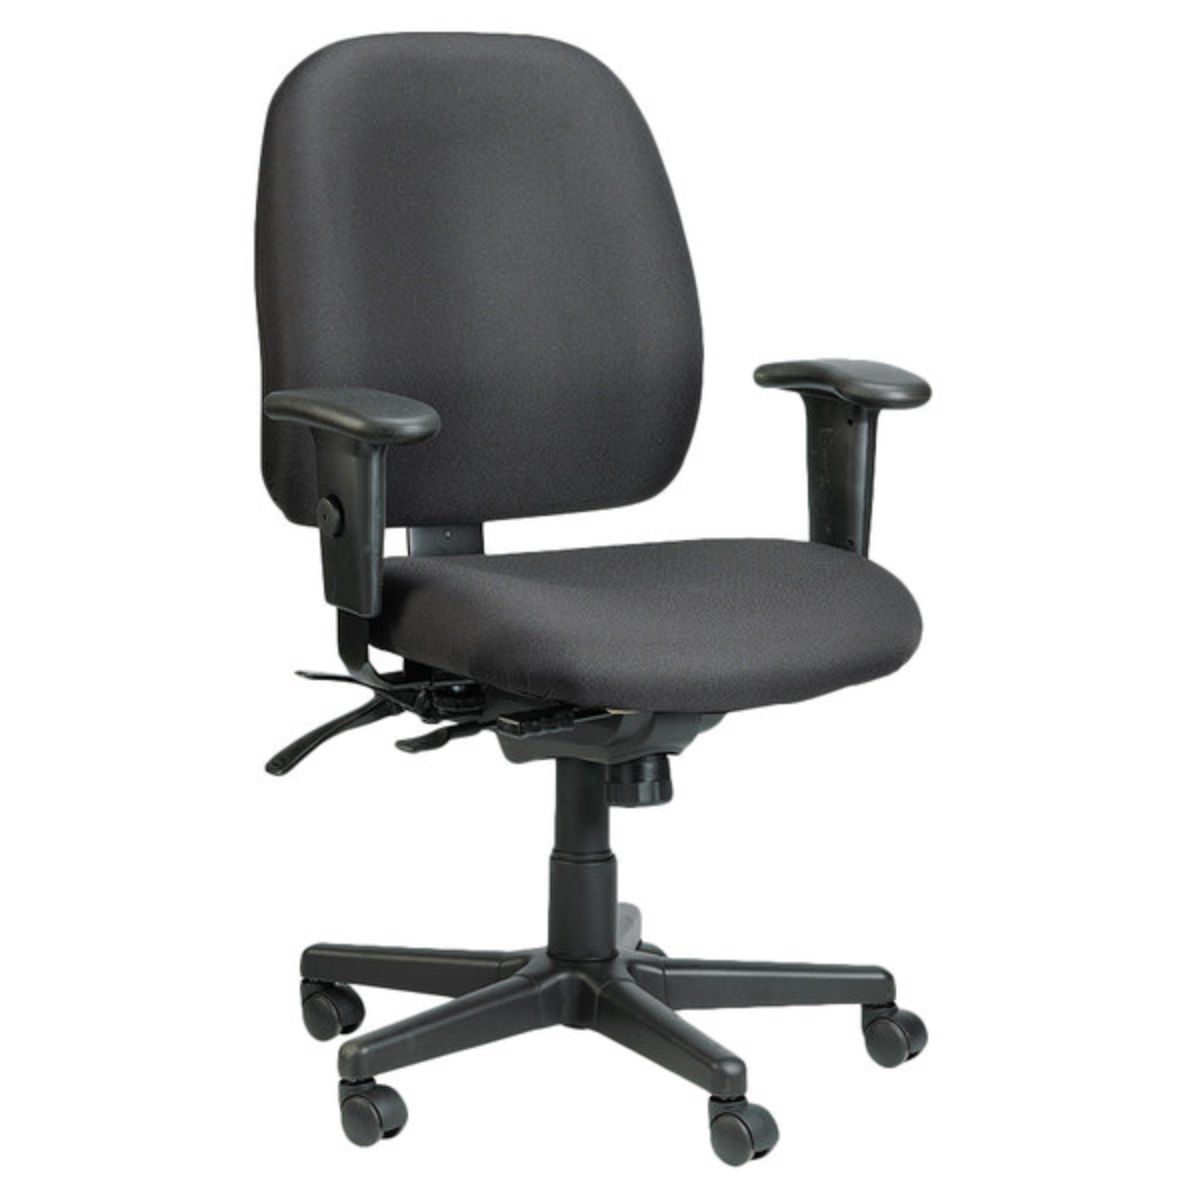 Black Adjustable Swivel Fabric Rolling Office Chair-372333-1